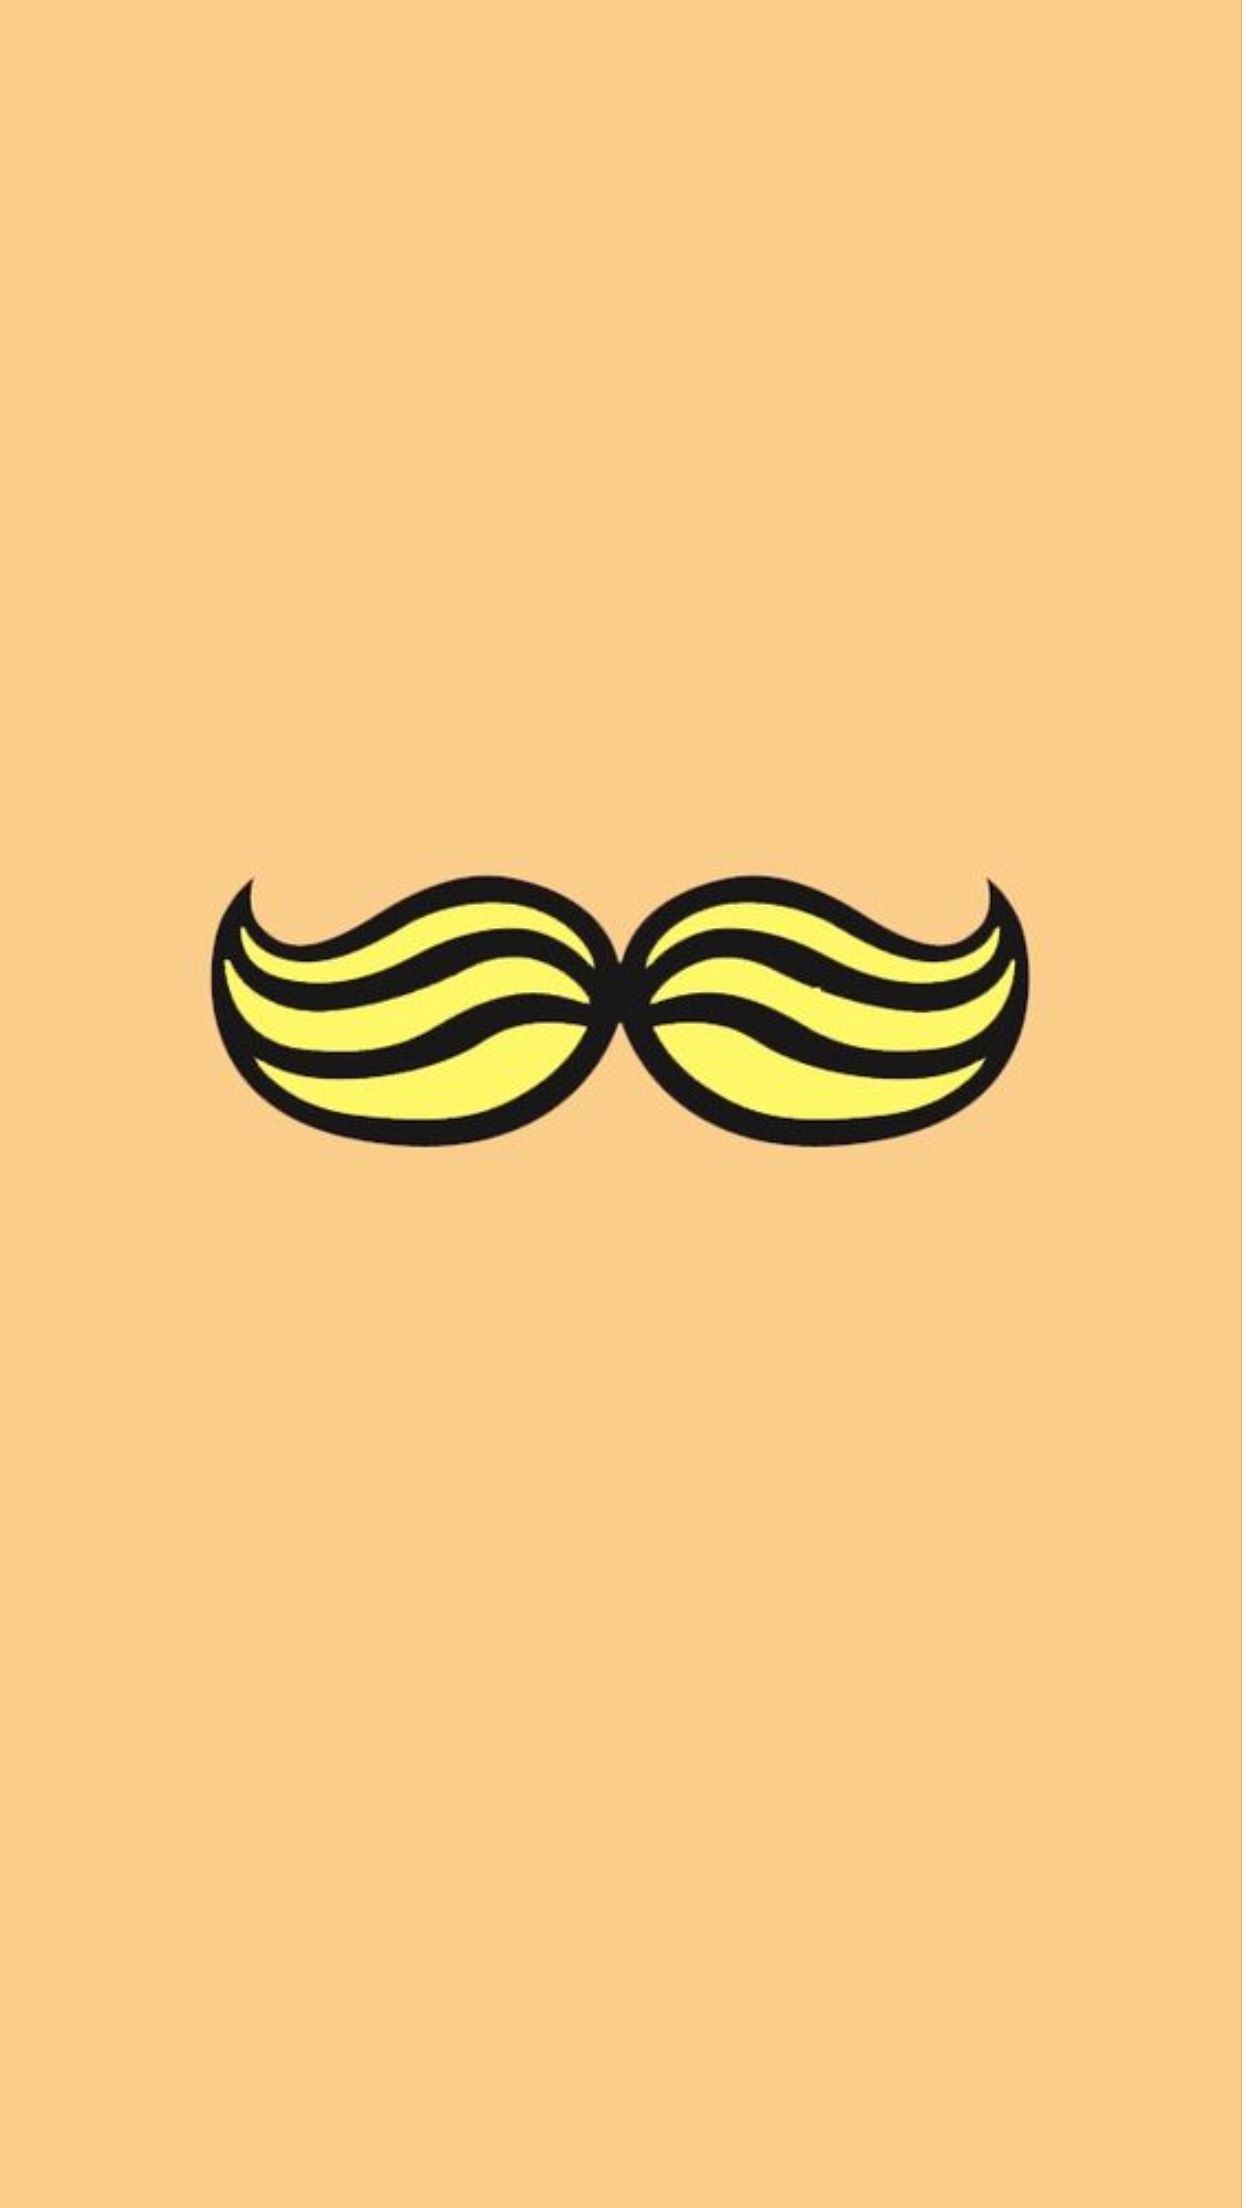 Cute Mustache Wallpapers on Tumblr ·① WallpaperTag